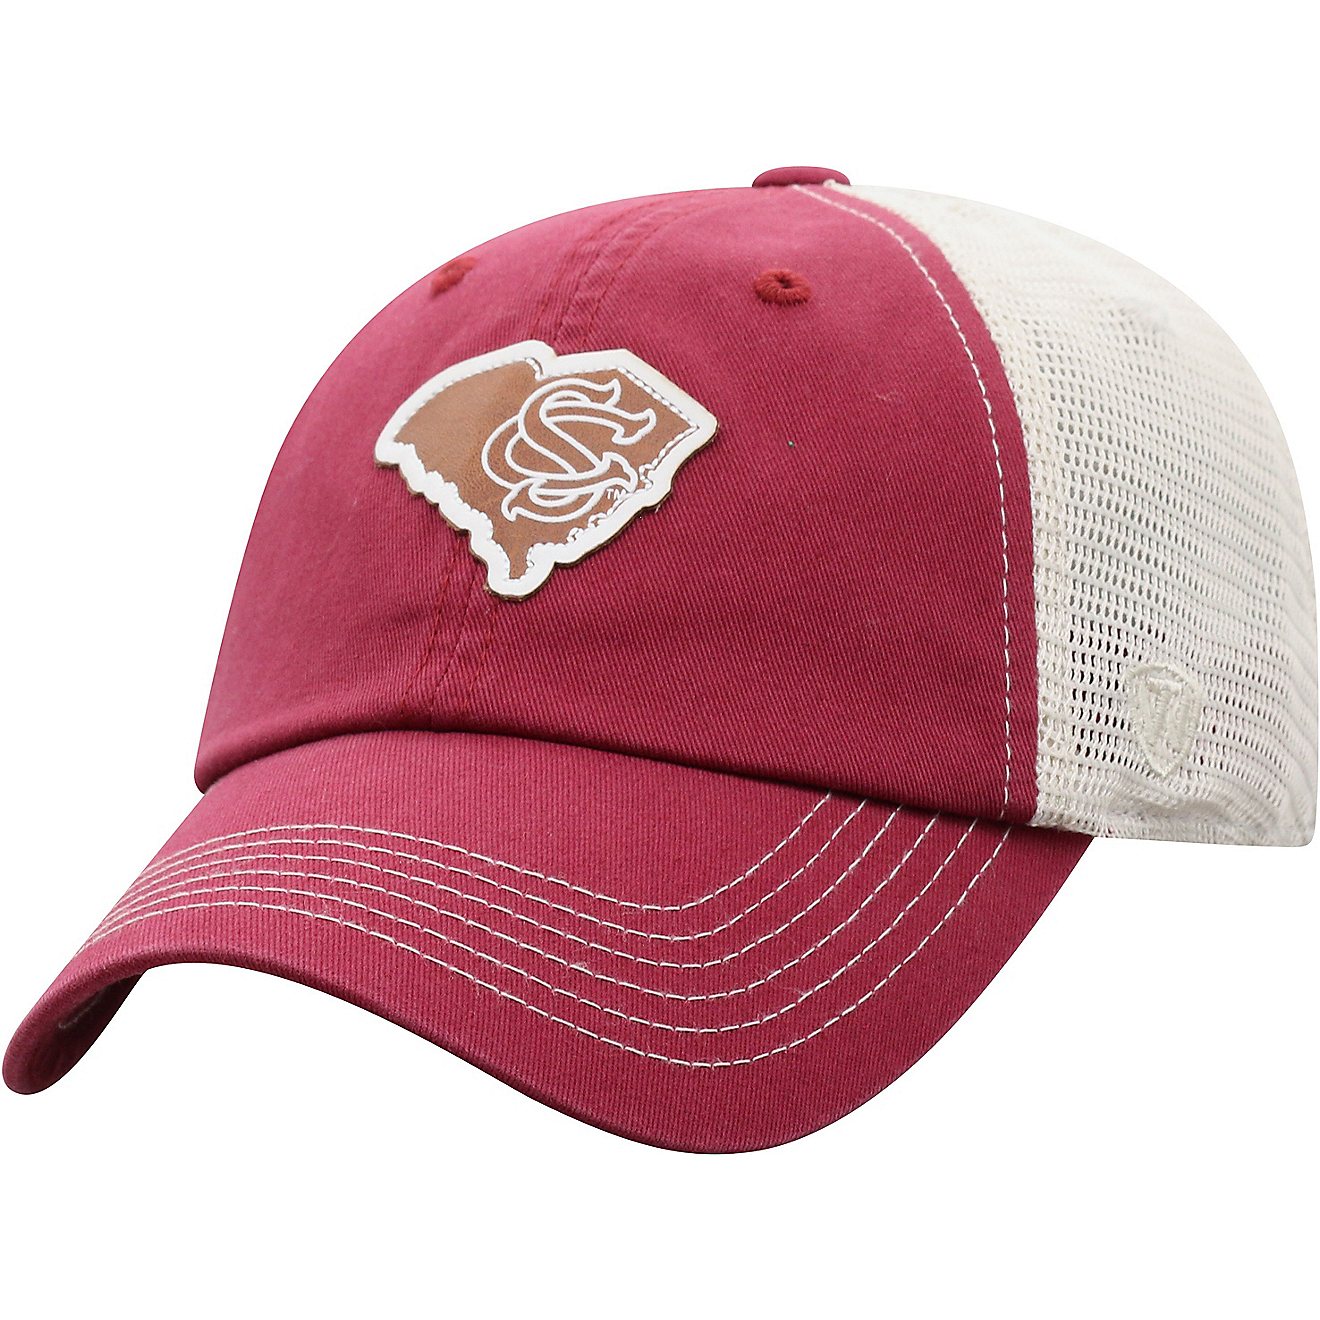 Top of the World Adults' University of South Carolina Hidestate Adjustable 2-Tone Cap                                            - view number 3